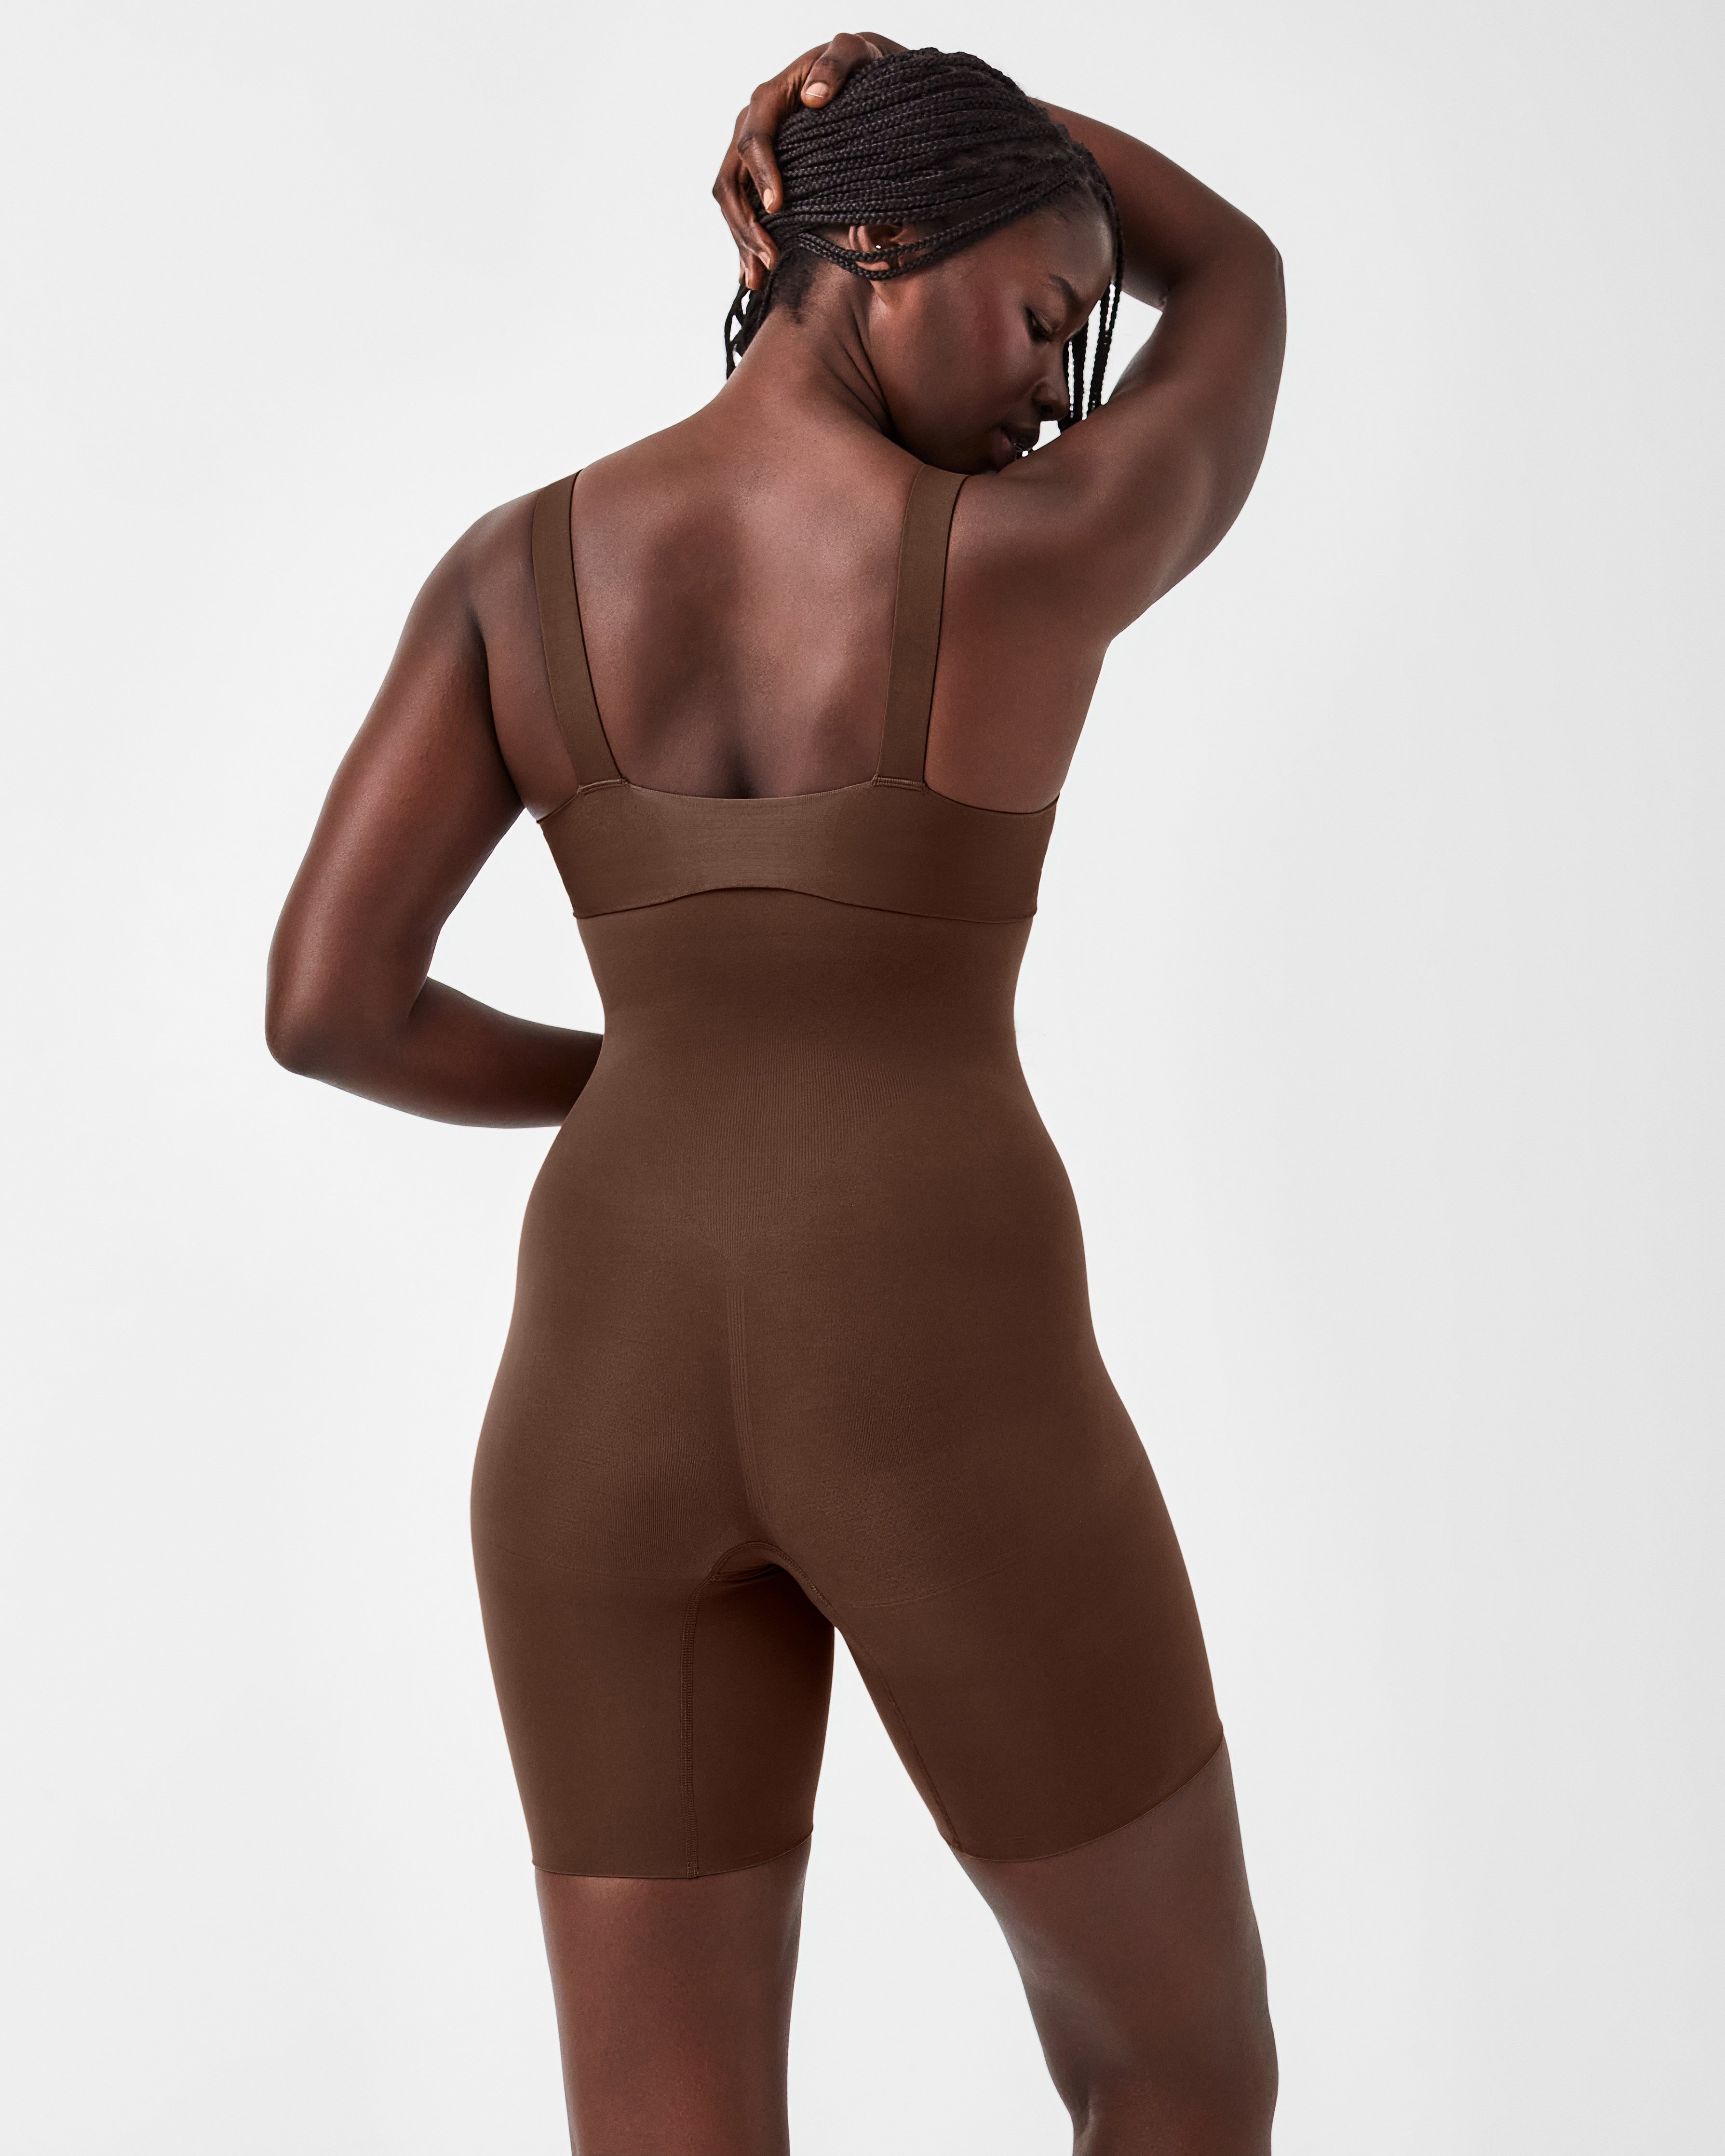 Spanx Higher Power shaping brief in chestnut brown